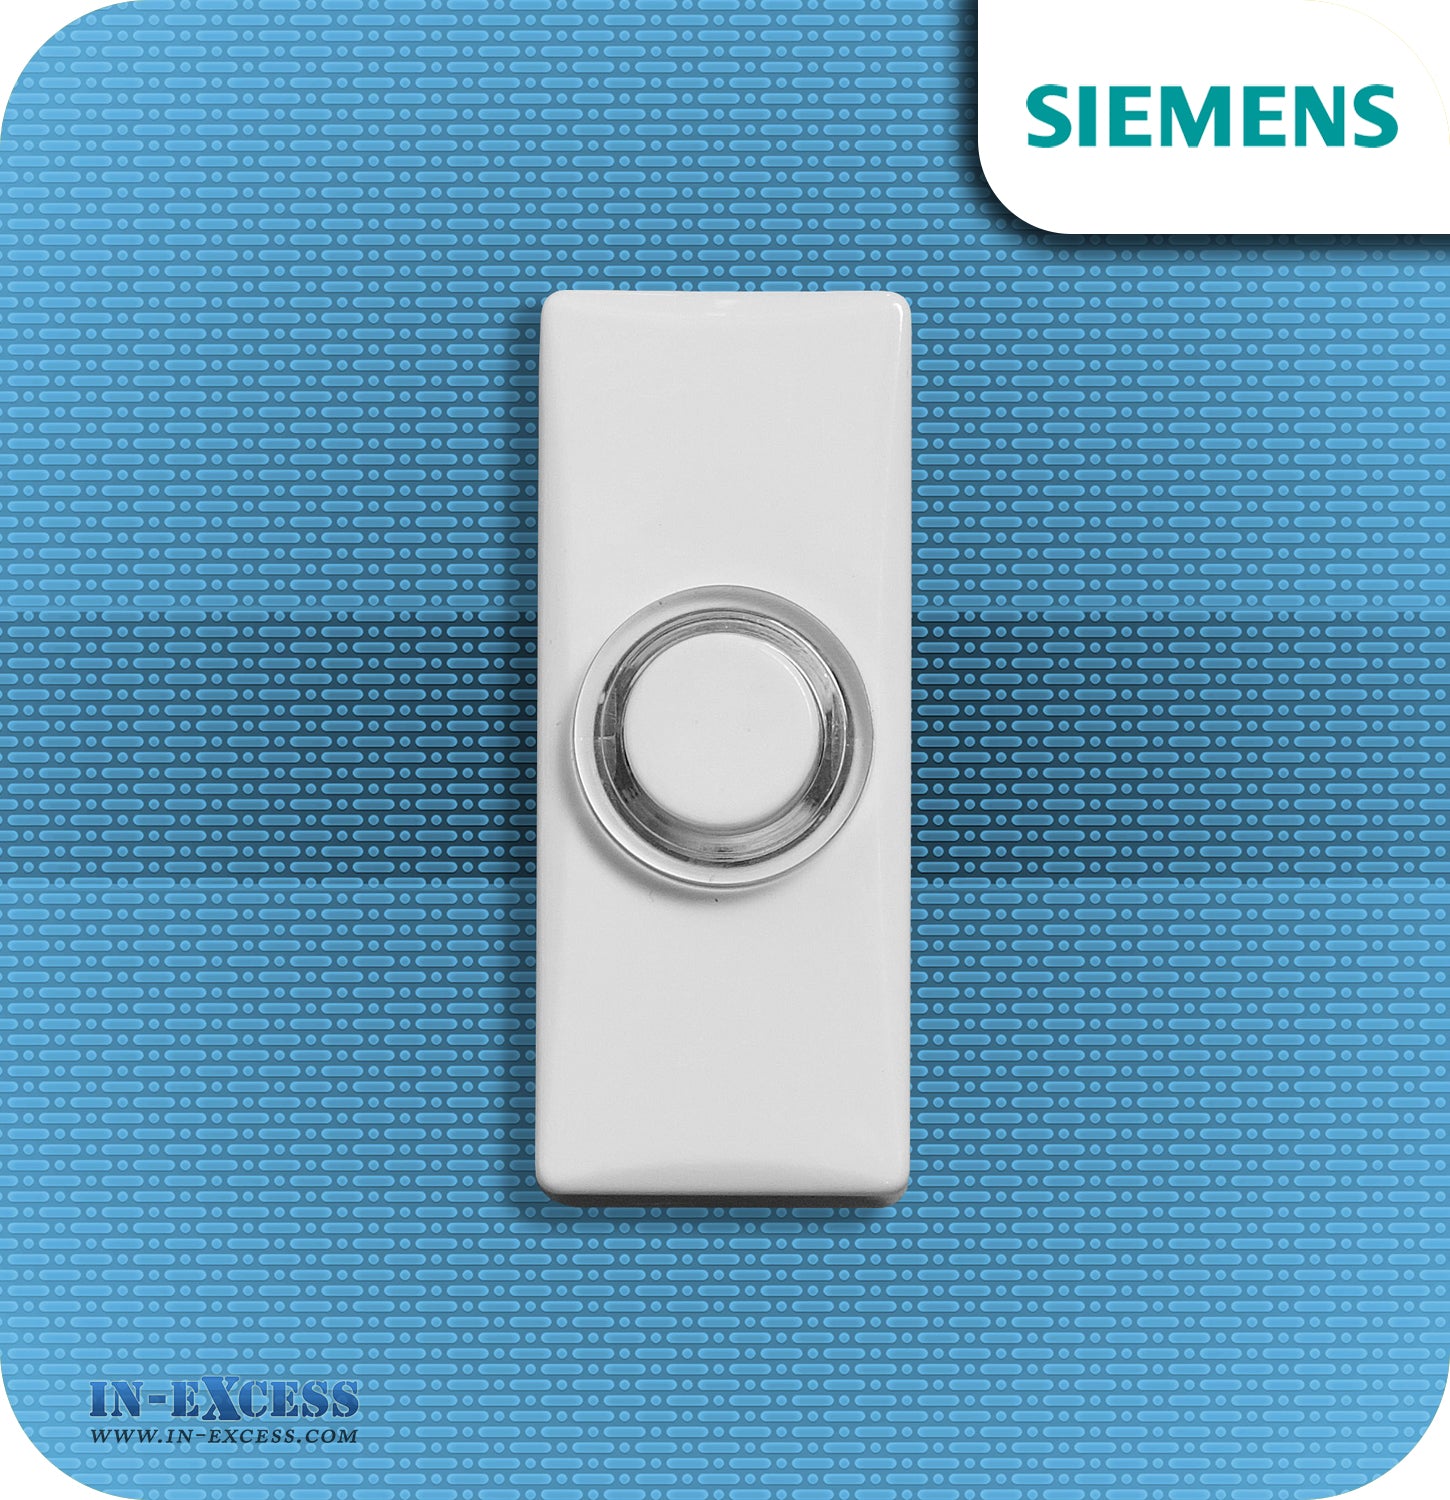 Siemens Backlit White Wired Bell Push For Wired Door Chimes - JSJS-309 (DCW12)